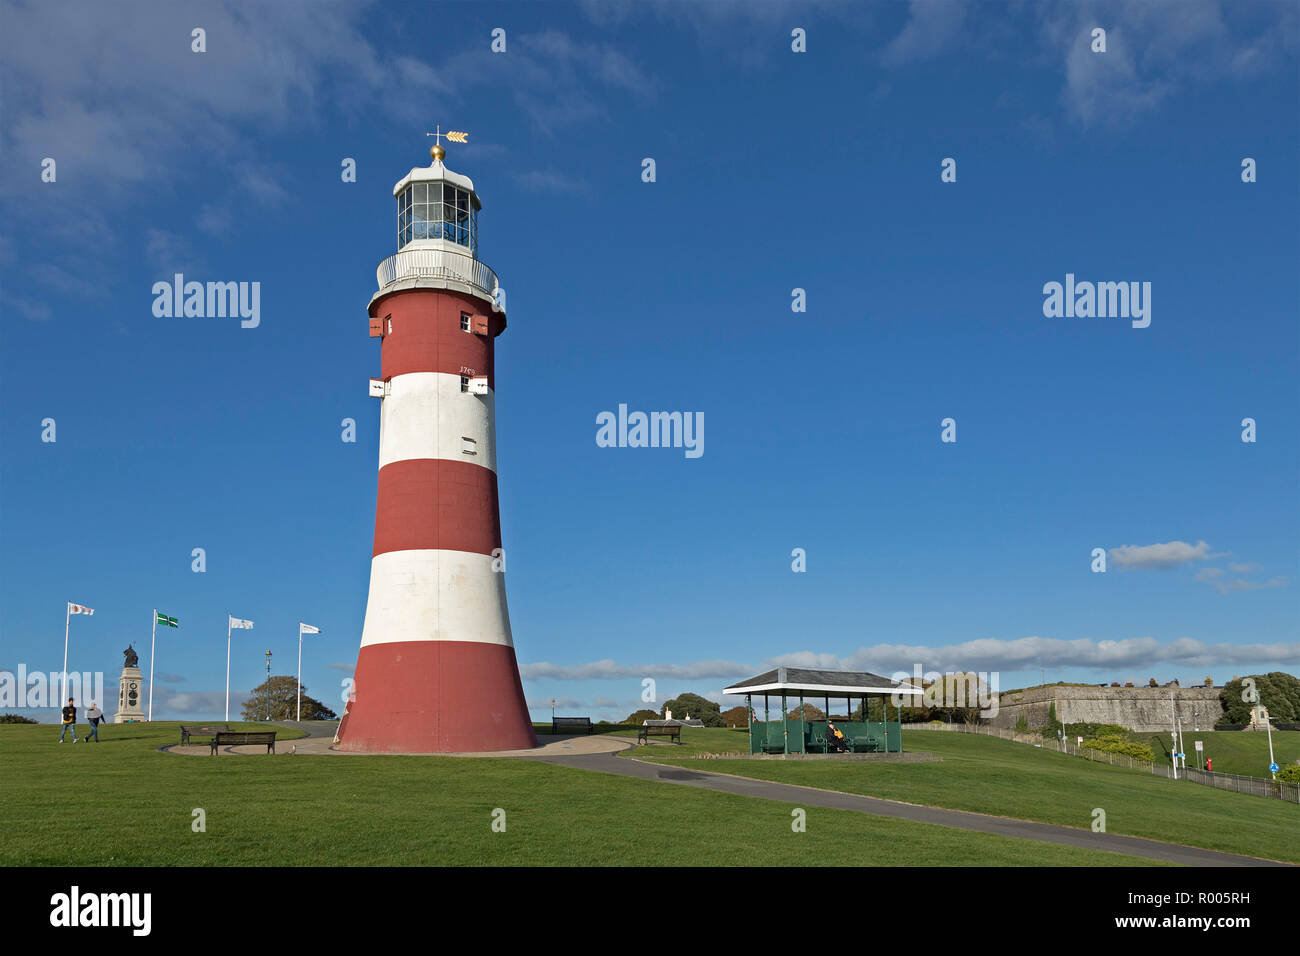 Smeaton's Tower sur Plymouth Hoe, Plymouth, Devon, Angleterre, Grande-Bretagne Banque D'Images